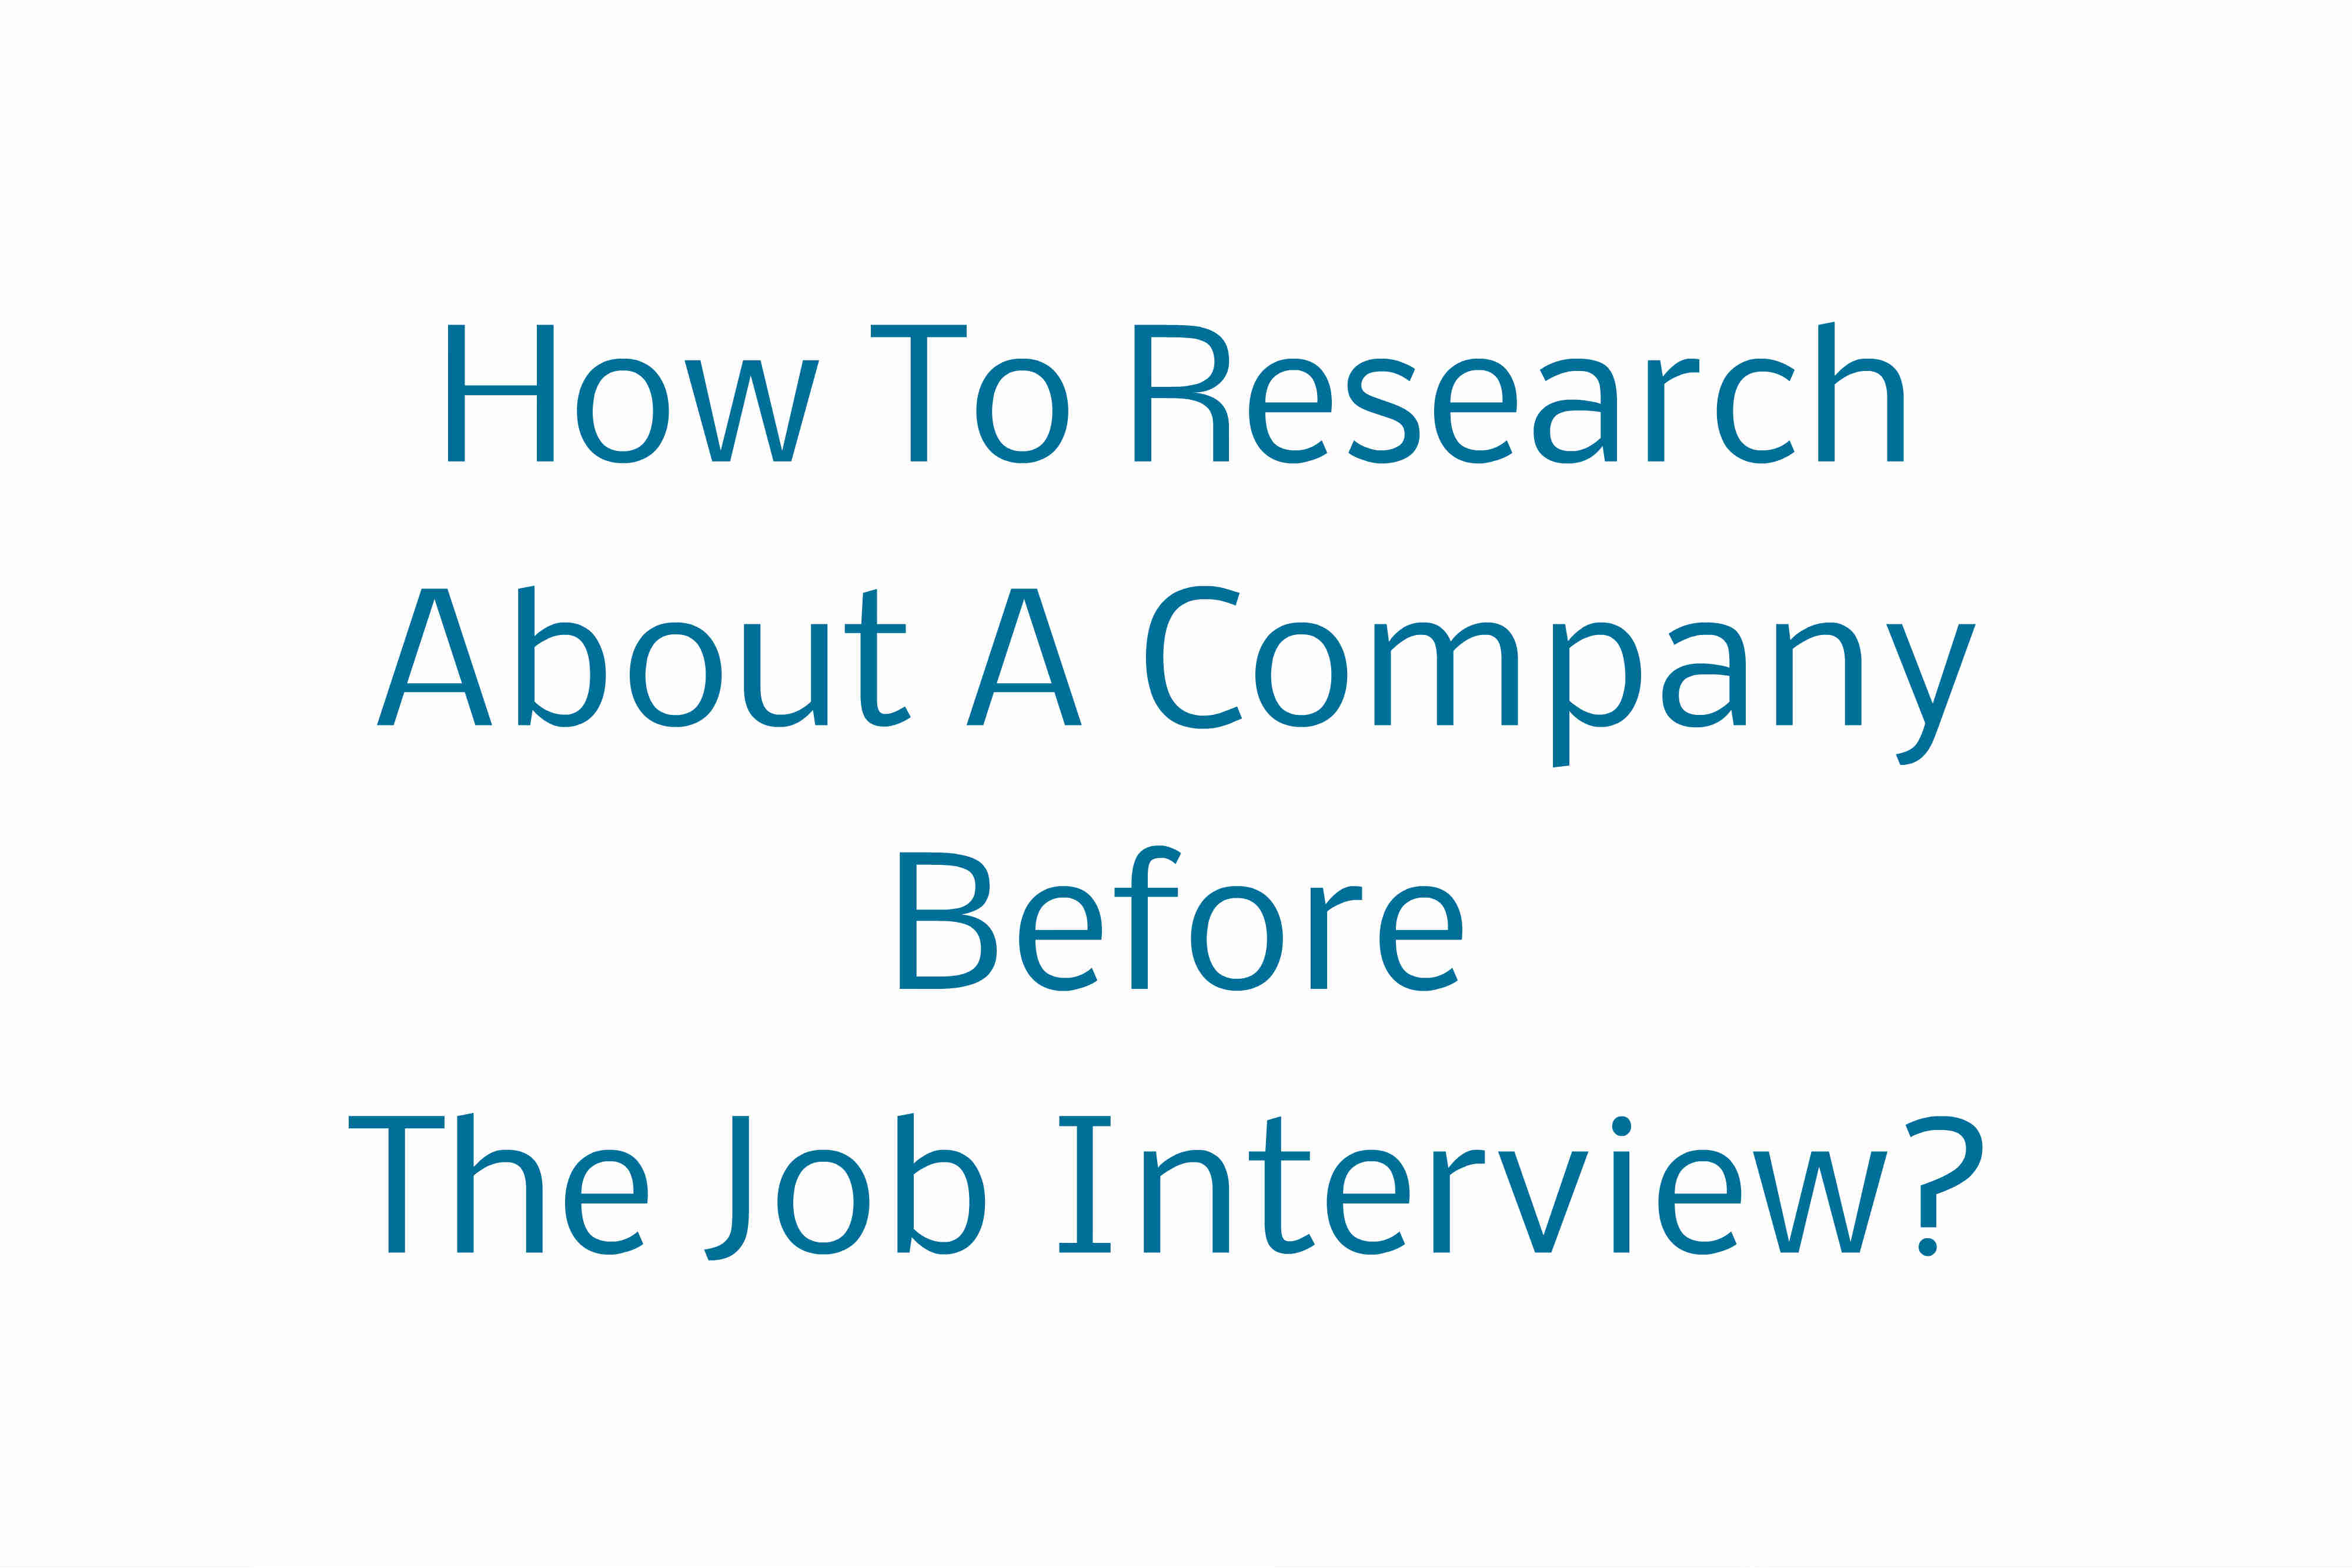 How To Research About A Company Before The Job Interview